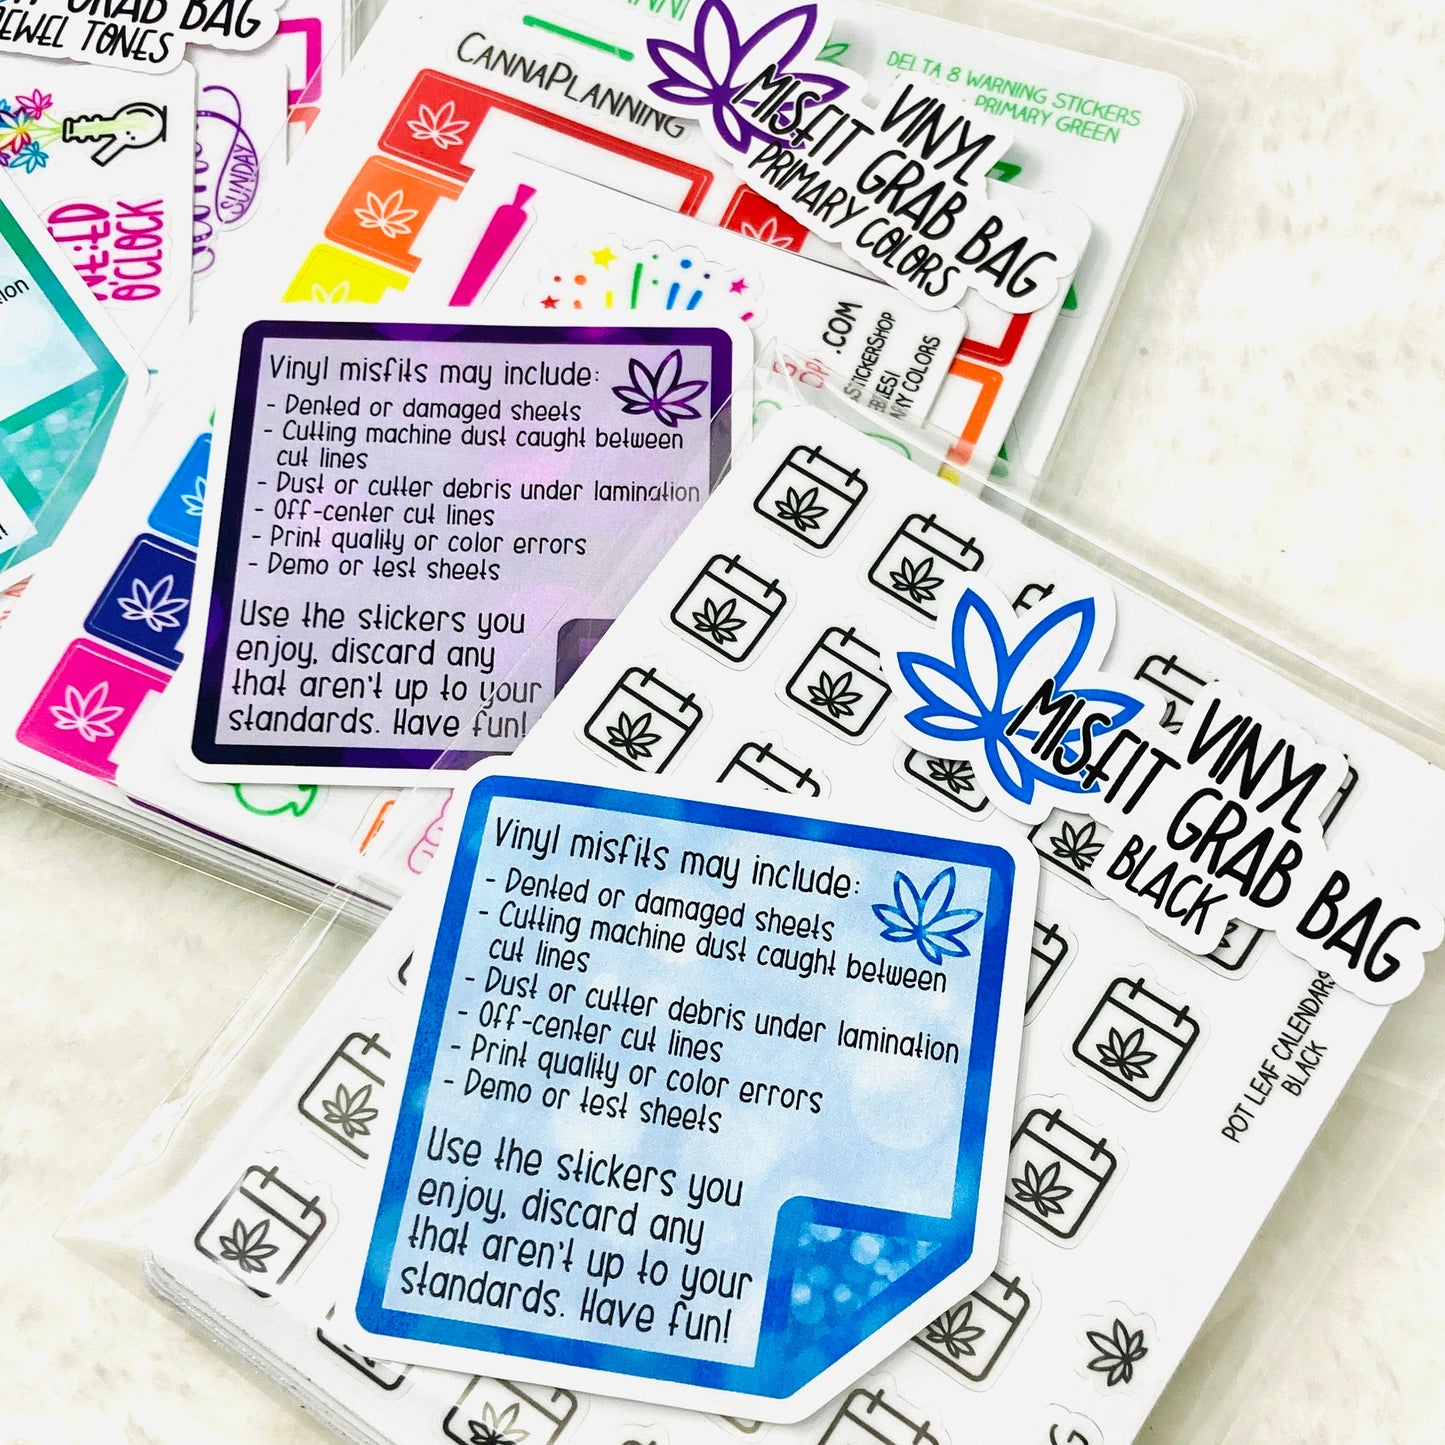 Mini VINYL Misfit Sticker Grab Bags - Weedy icon, lettering, warning and functional stickers | Cannabis 420 planner mystery random stickers